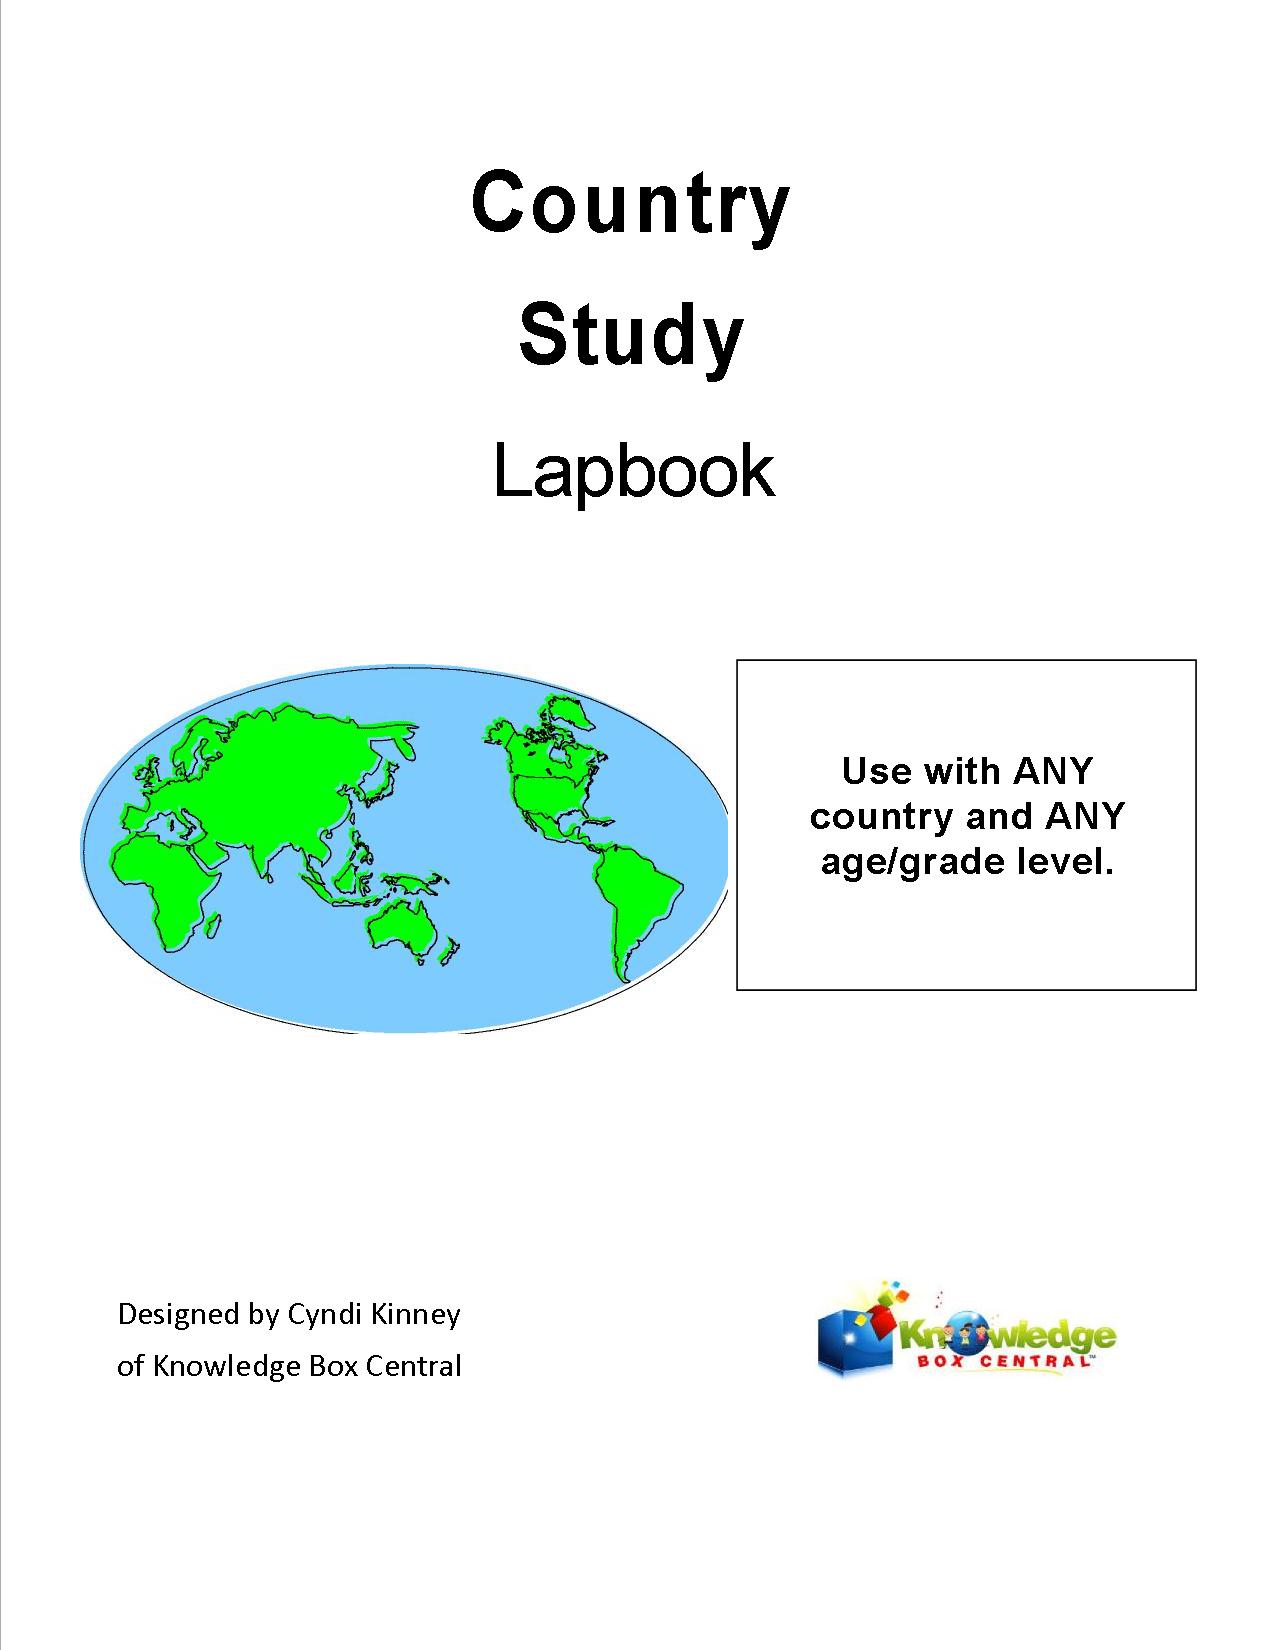 Free for All! Country Study Lapbook